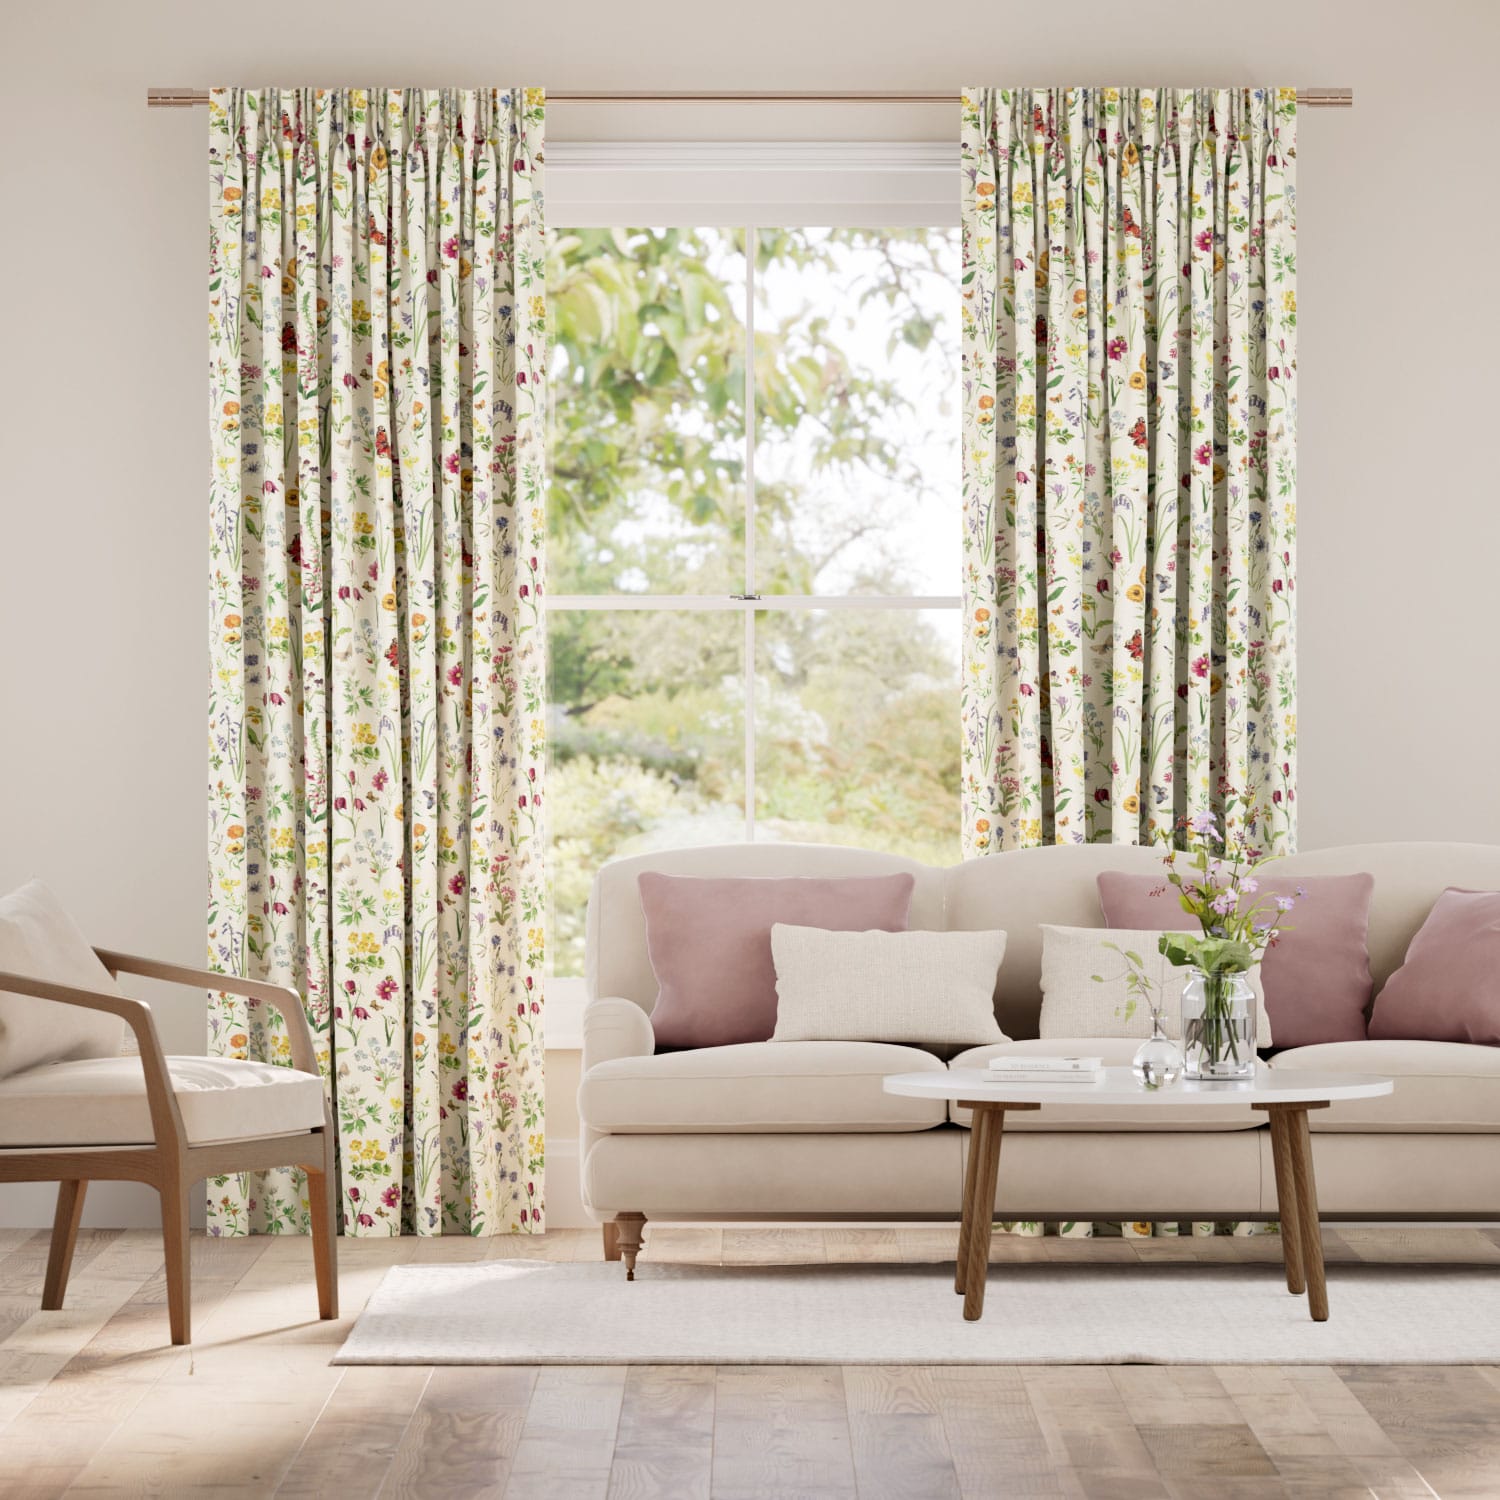 Wild Flowers Meadow Curtains